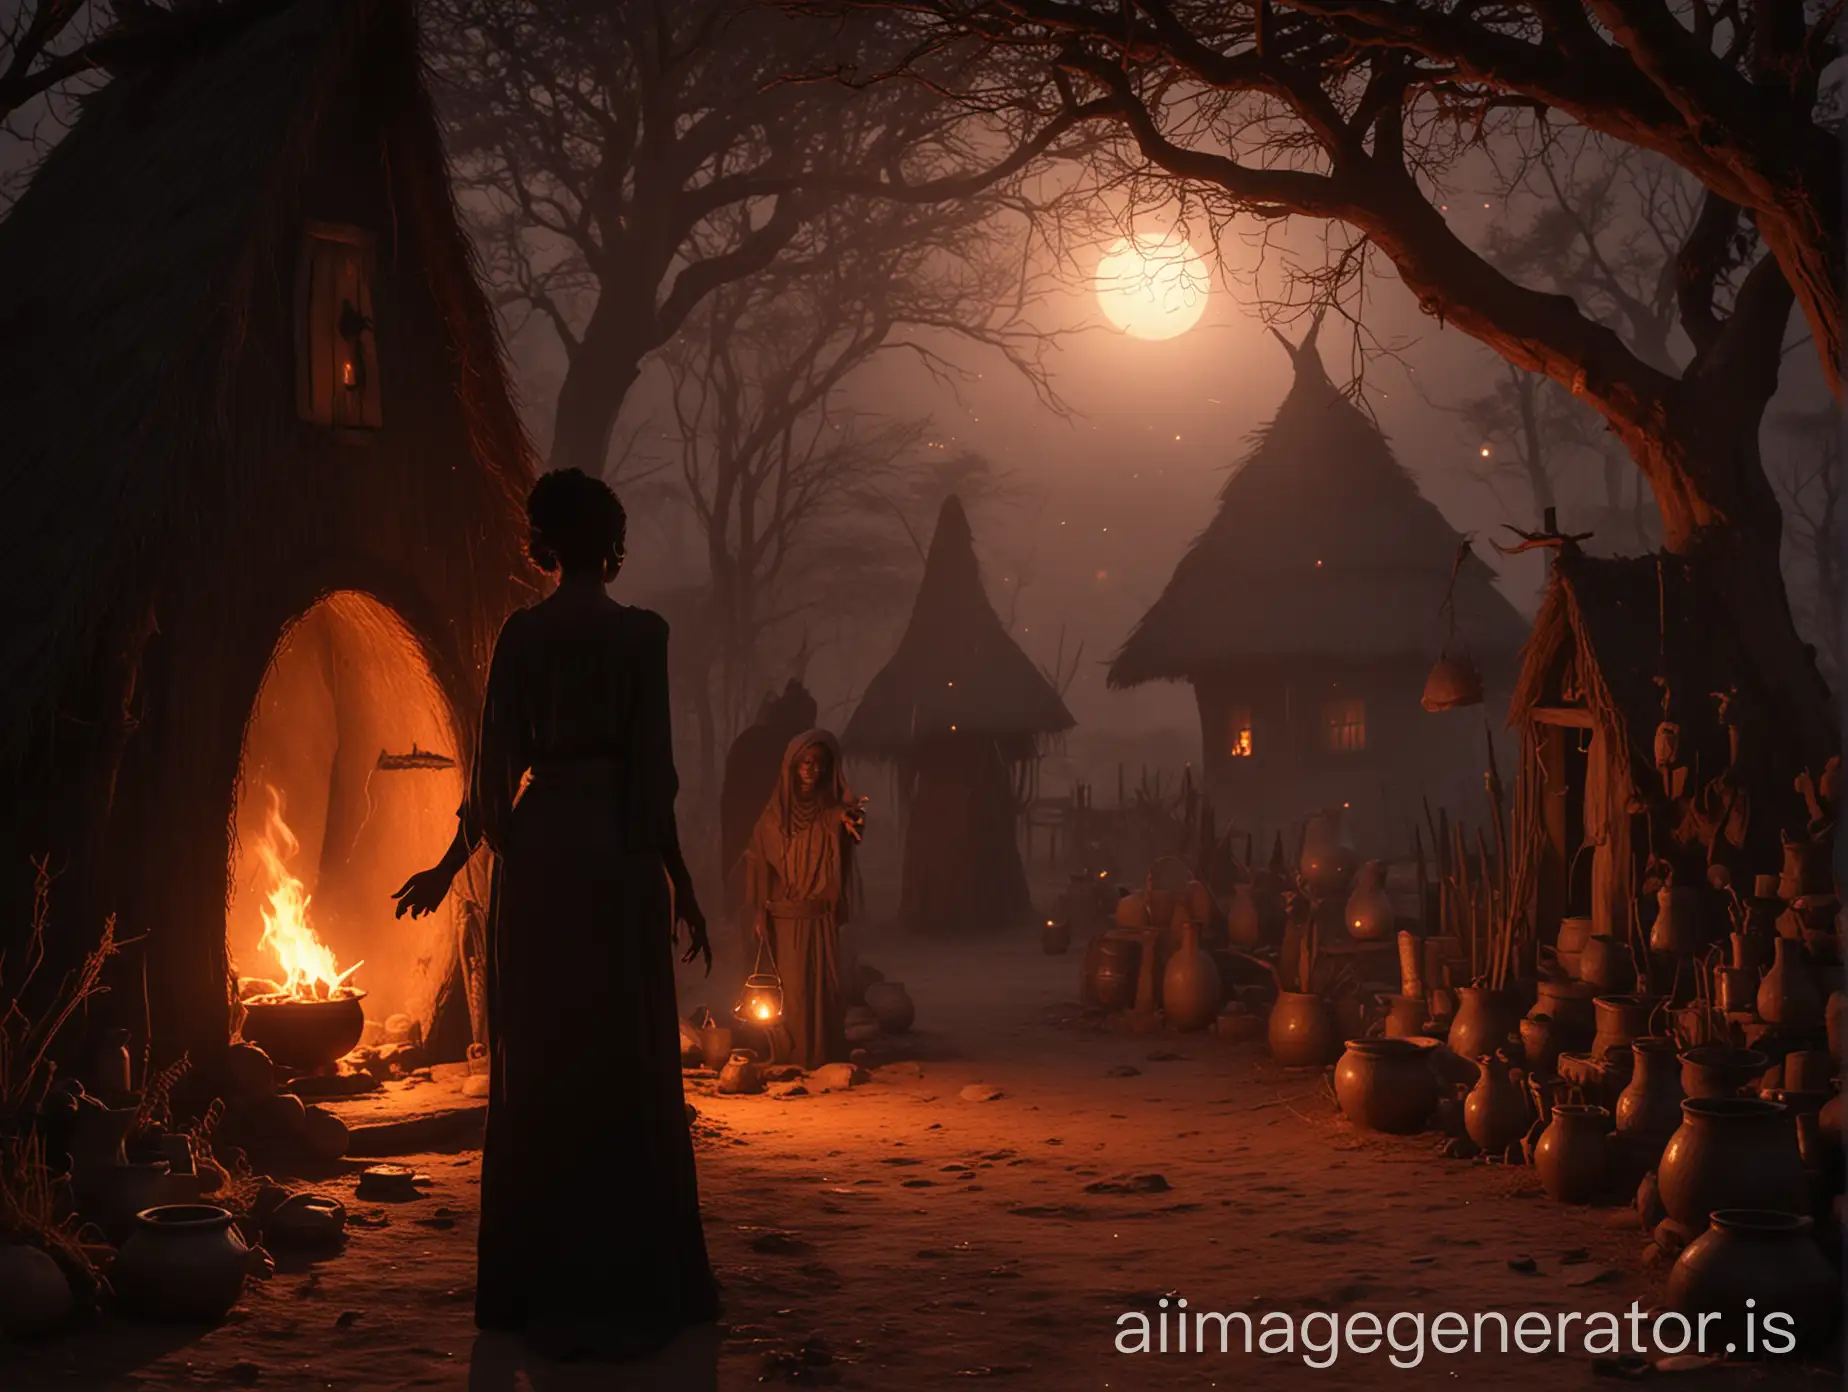 African-Woman-Receiving-Potion-by-Witch-Hut-in-Eerie-Glow